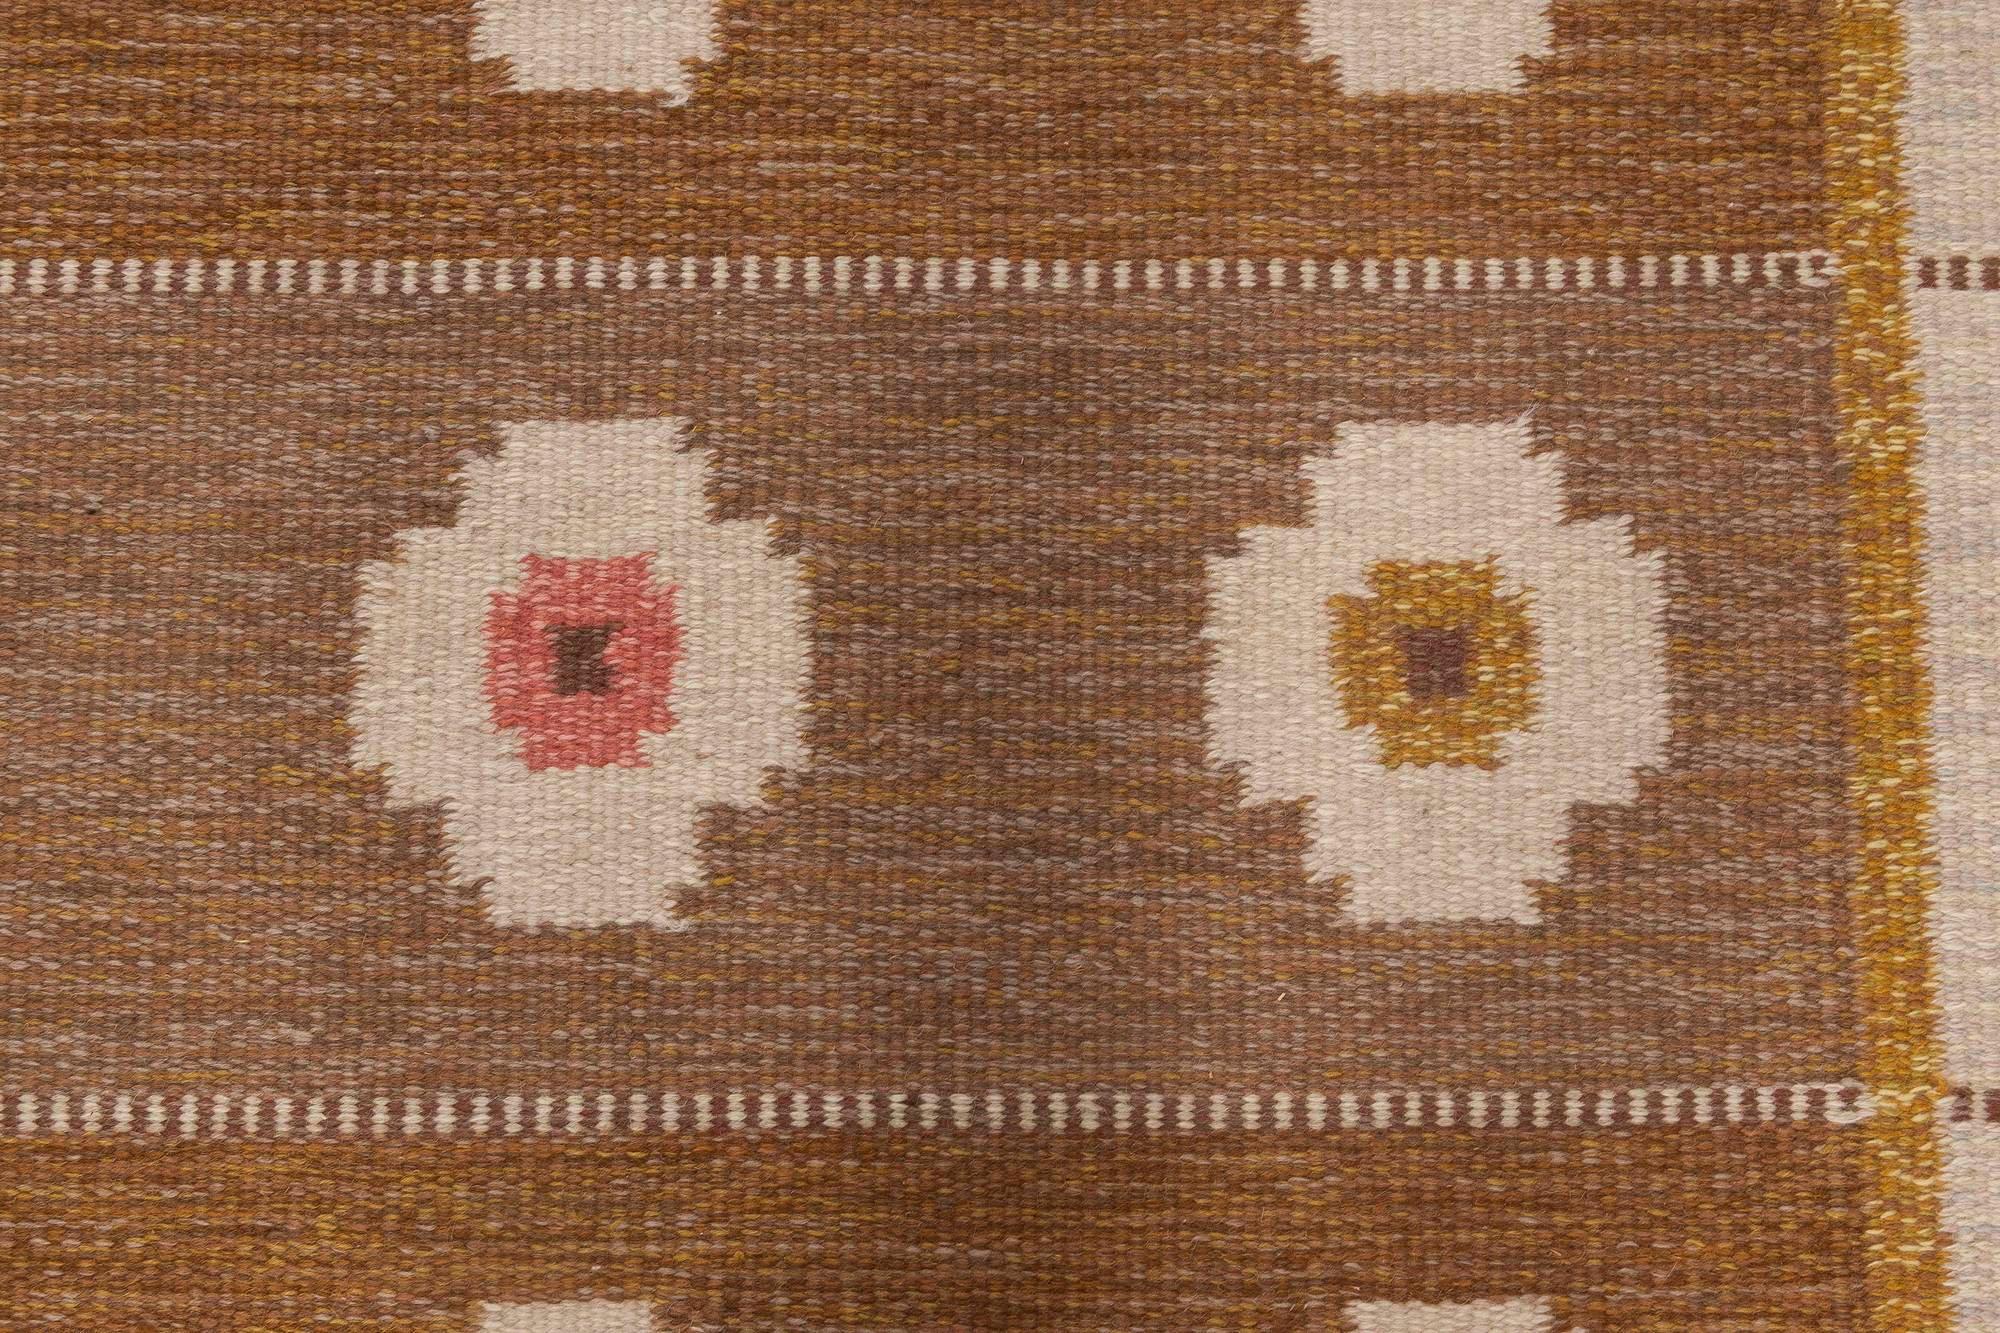 Mid-20th century Swedish flatweave wool rug by Alice Wallebäck - Woven signature at one end AW
Size: 5'6